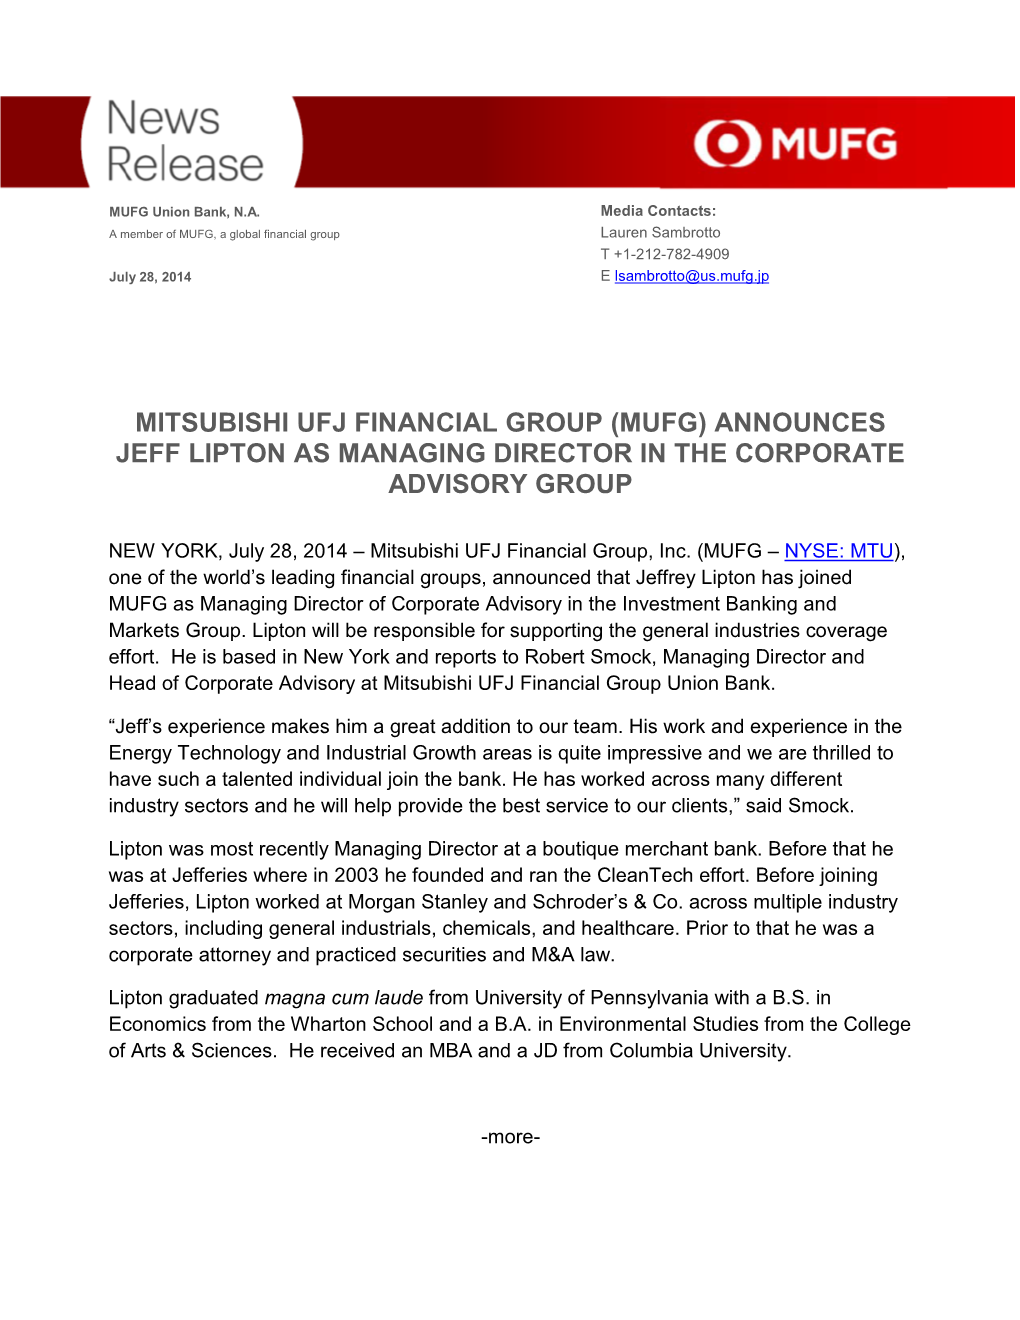 (Mufg) Announces Jeff Lipton As Managing Director in the Corporate Advisory Group